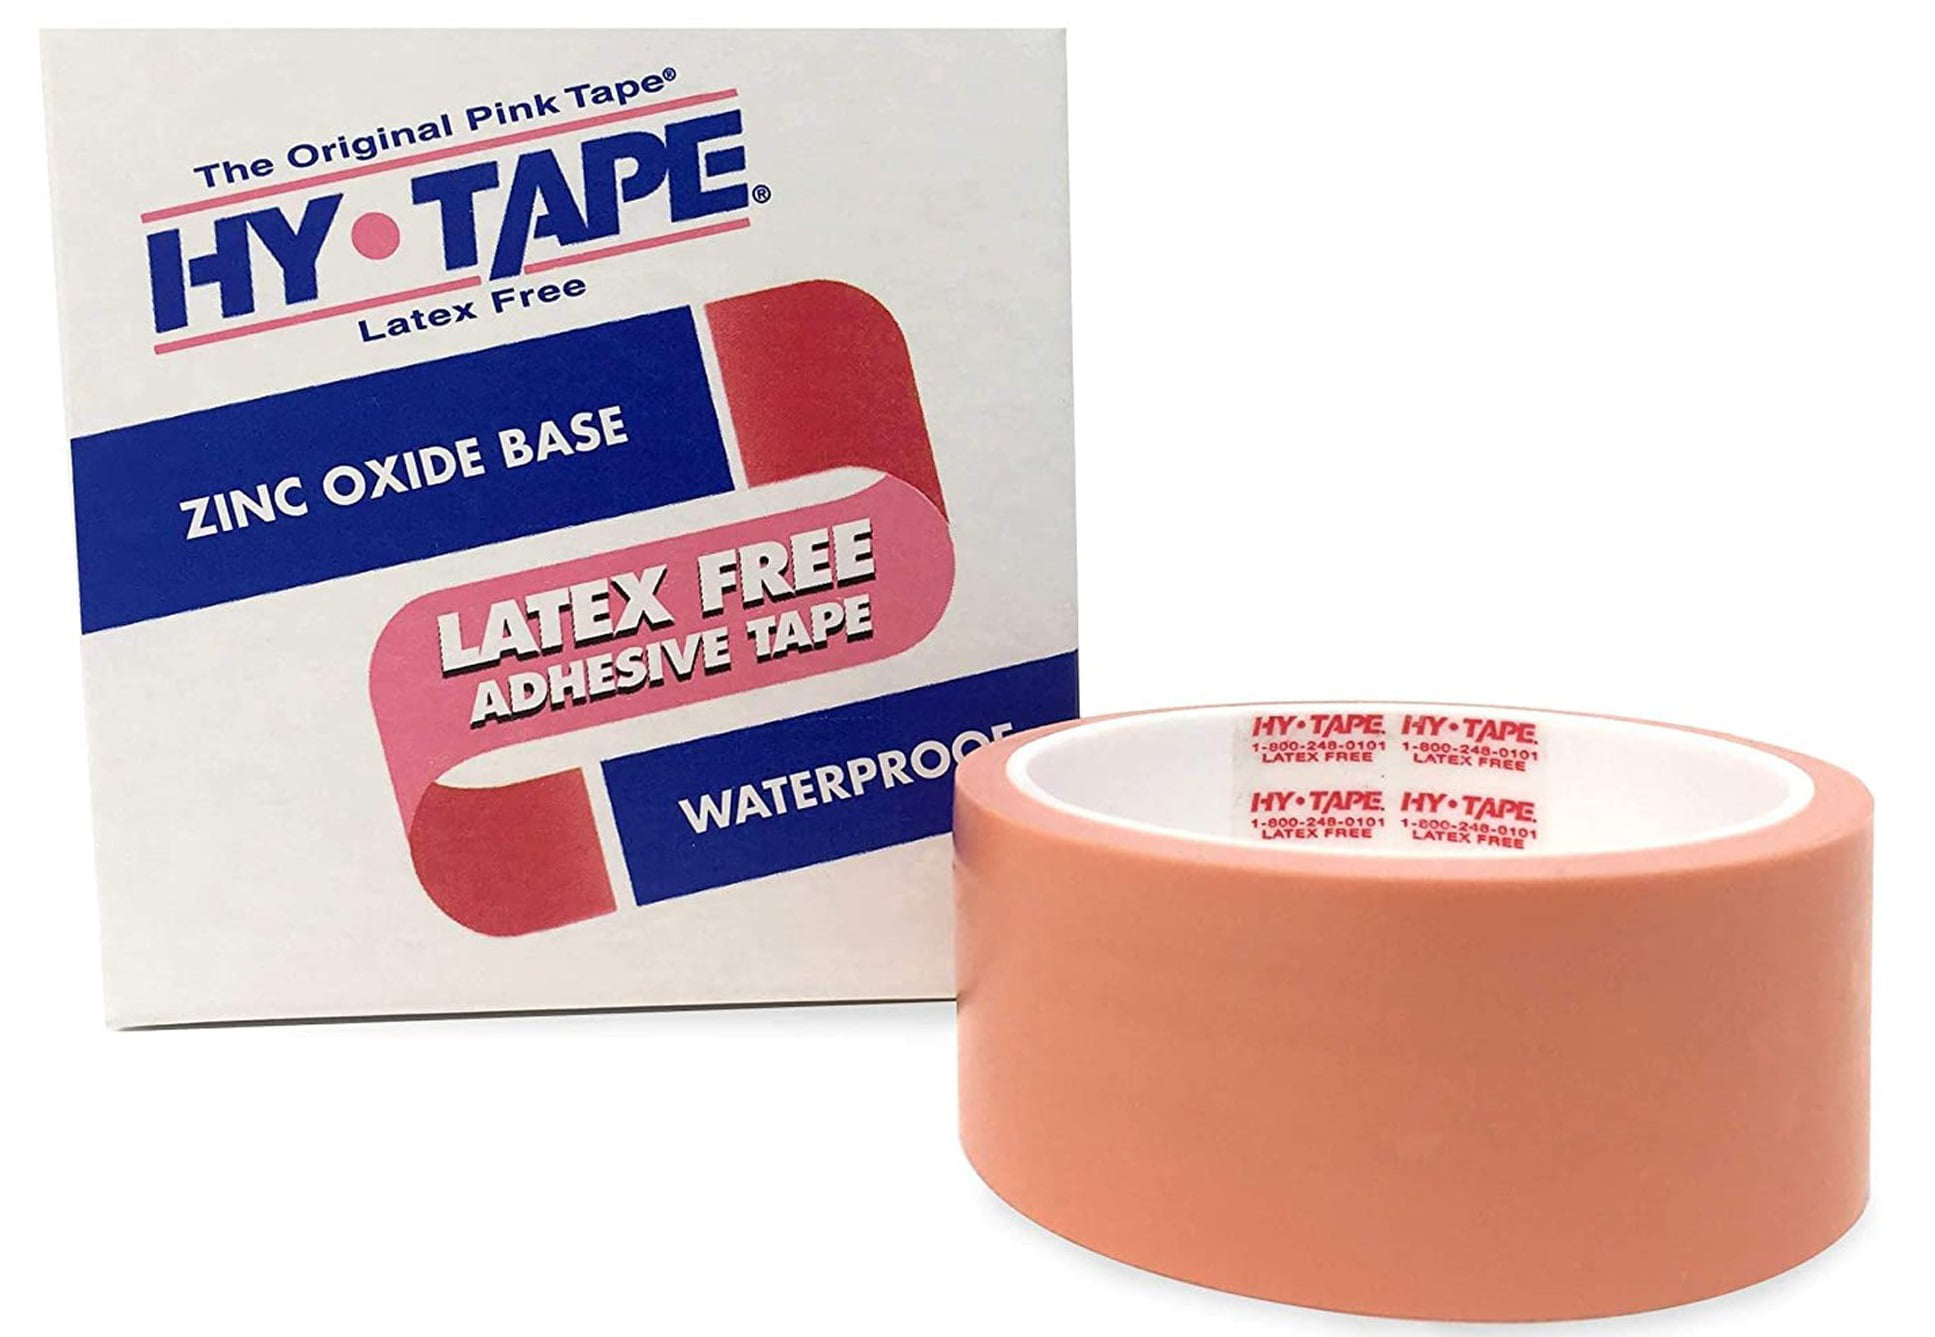  MAT Duct Tape Pink Industrial Grade, 4 inch x 60 yds.  Waterproof, UV Resistant for Crafts, Home Improvement, Repairs, & Projects  : Industrial & Scientific